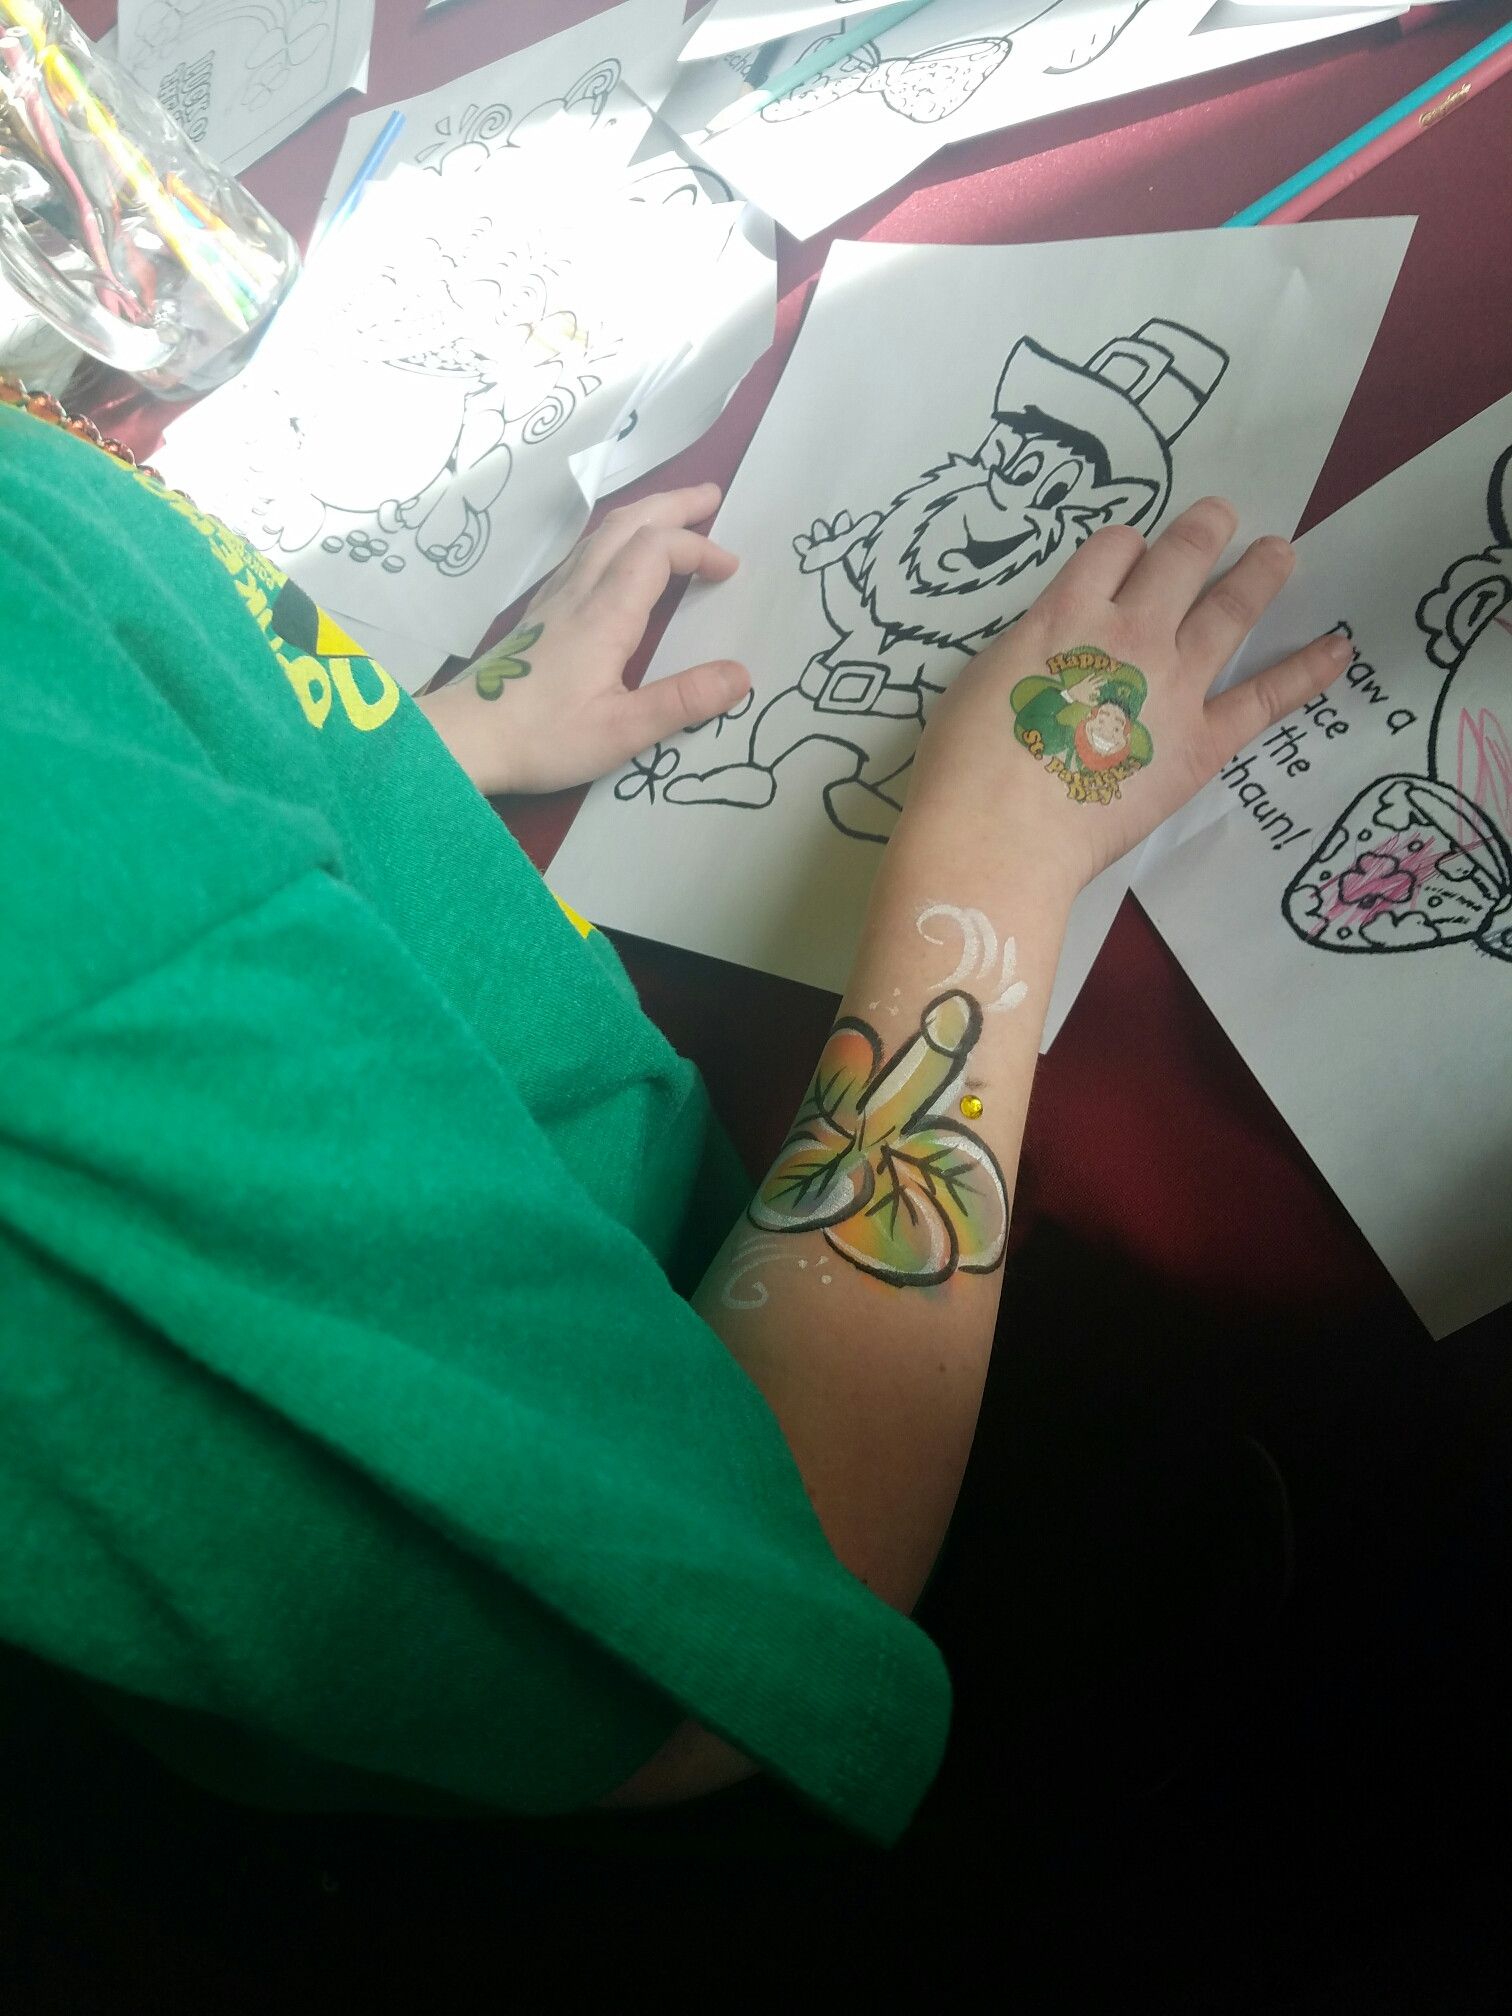 My niece got her arm painted at a St. Paddy's day festival. I mean I guess it looks like a clover....